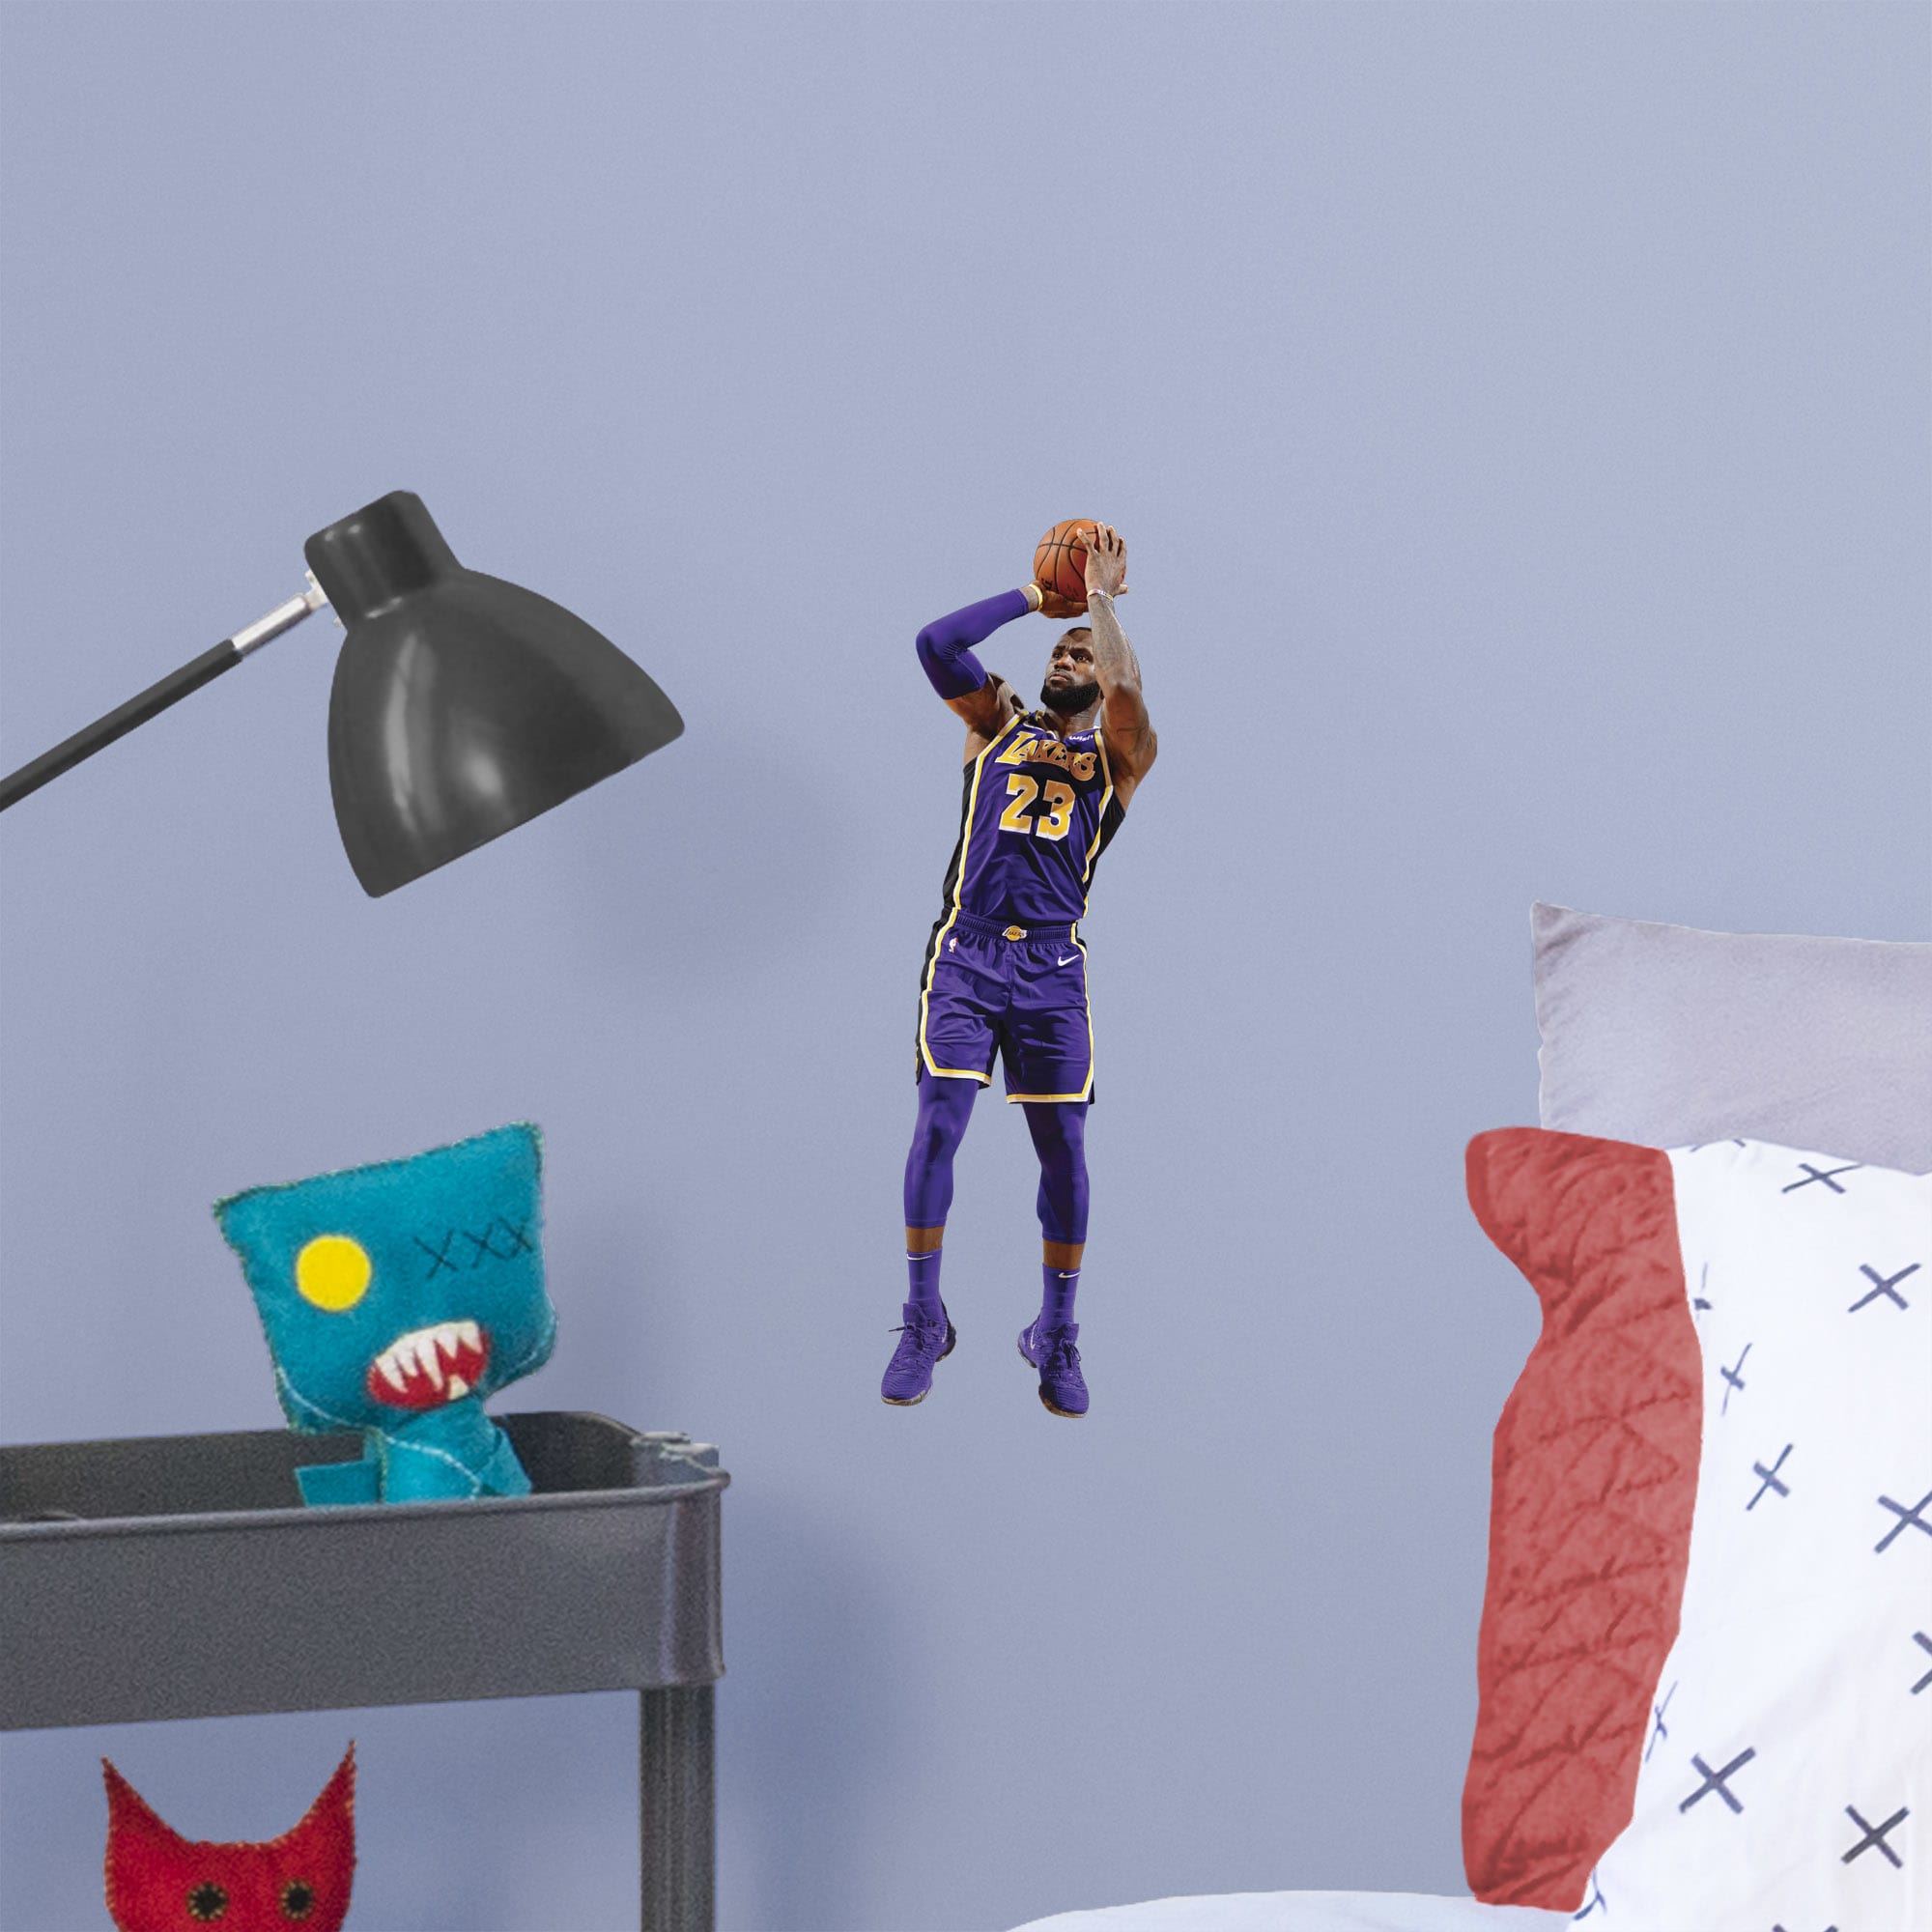 LeBron James for Los Angeles Lakers: Shooting - Officially Licensed NBA Removable Wall Decal Large by Fathead | Vinyl